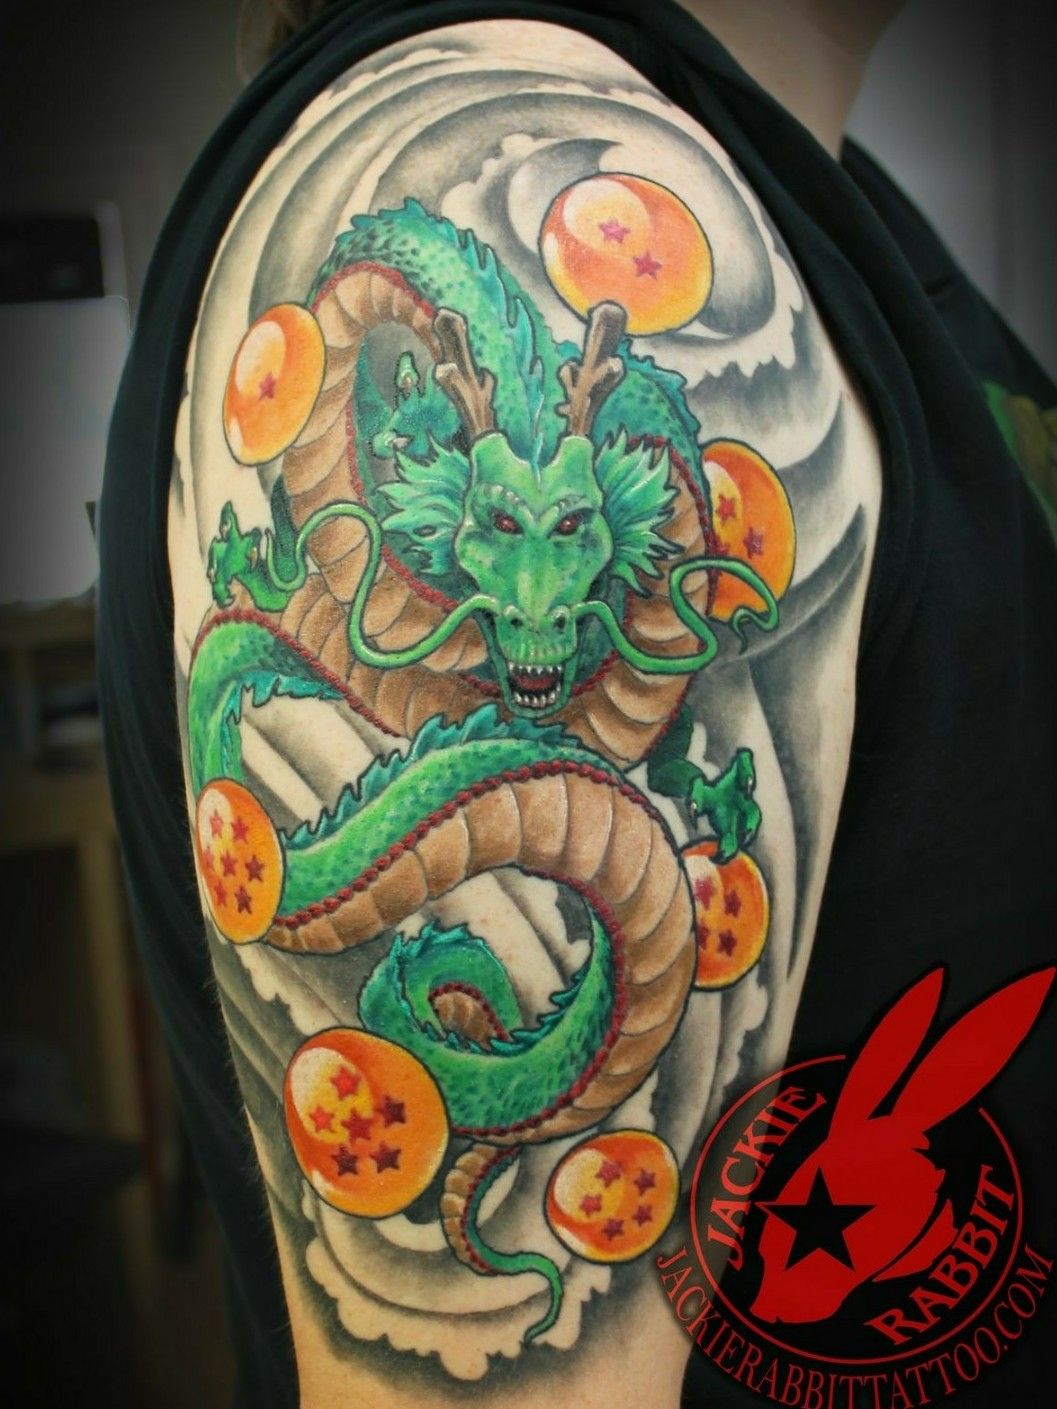 Black Relic Tattoo  Dragon Ball tattoo from yesterday  Facebook